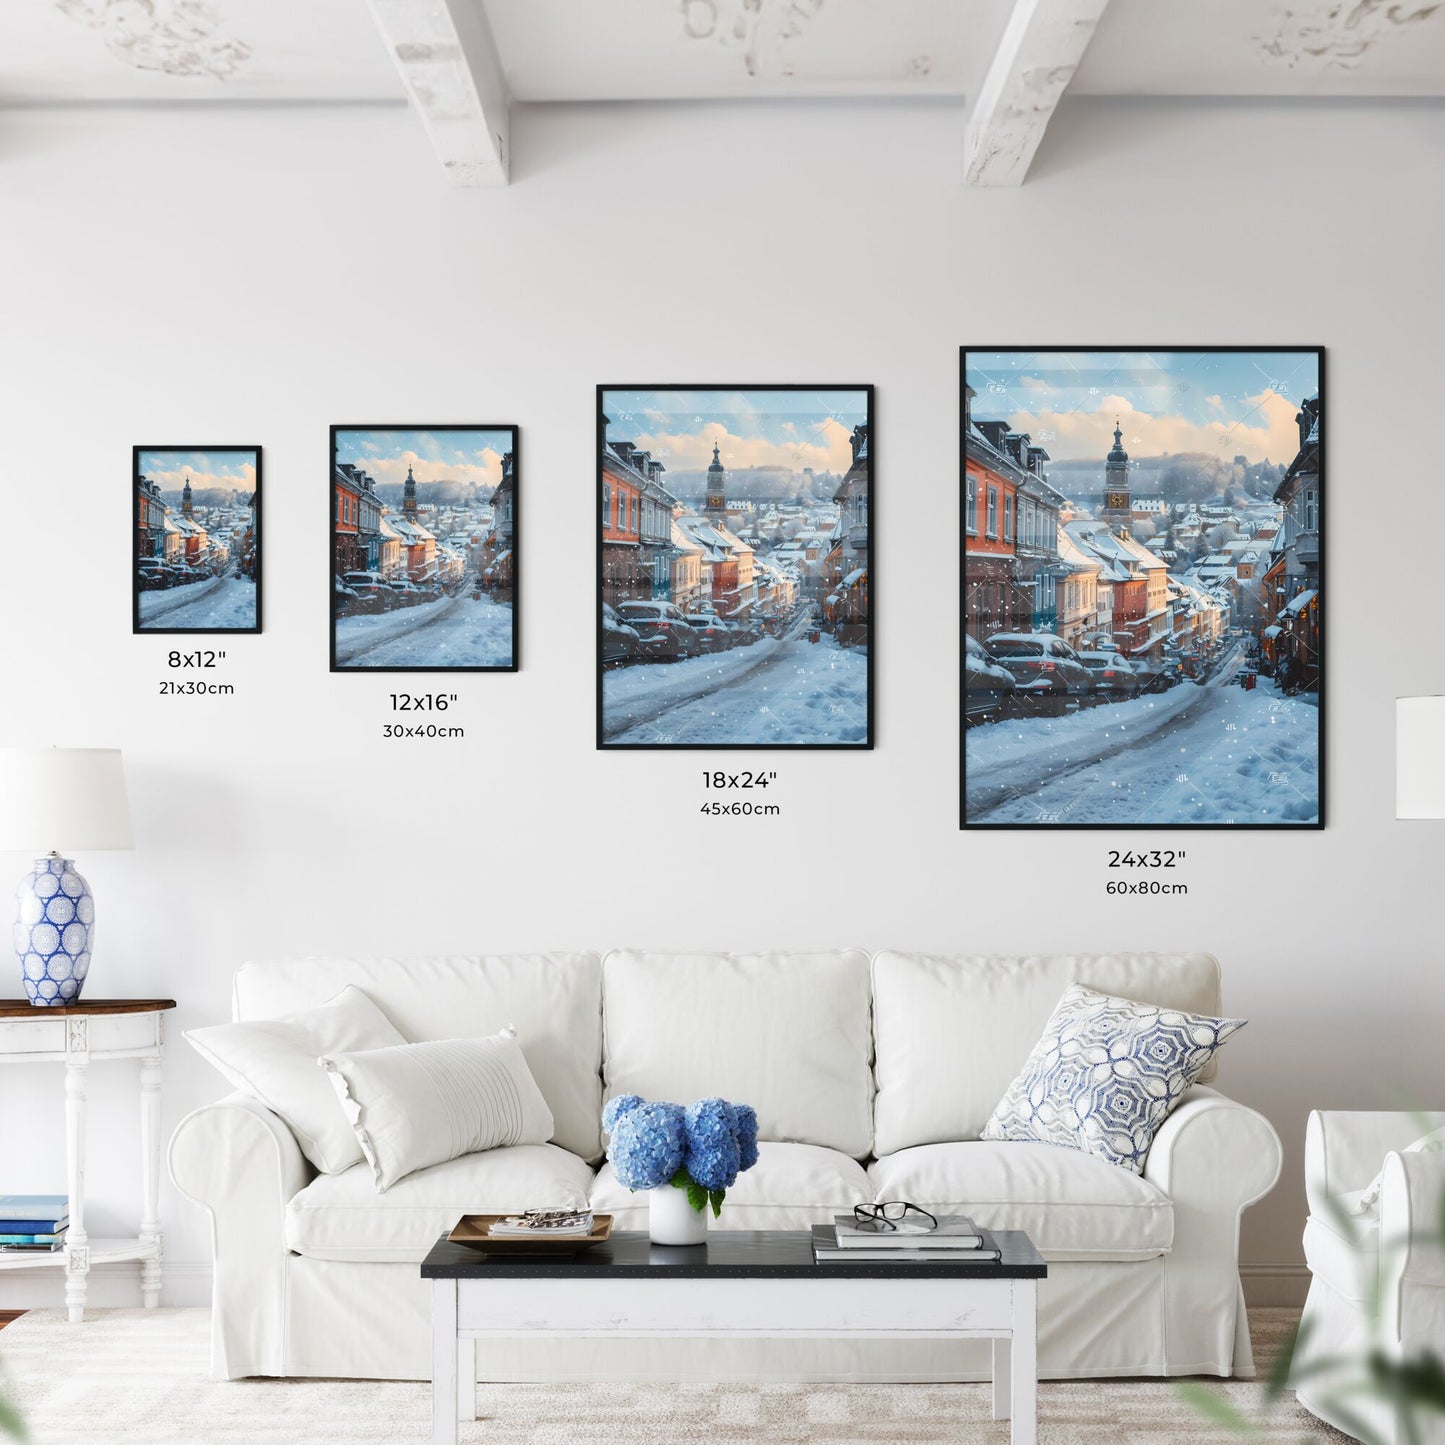 A Poster of Darmstadt Hesse germany Skyline - A Snowy Street With Cars And Buildings Default Title